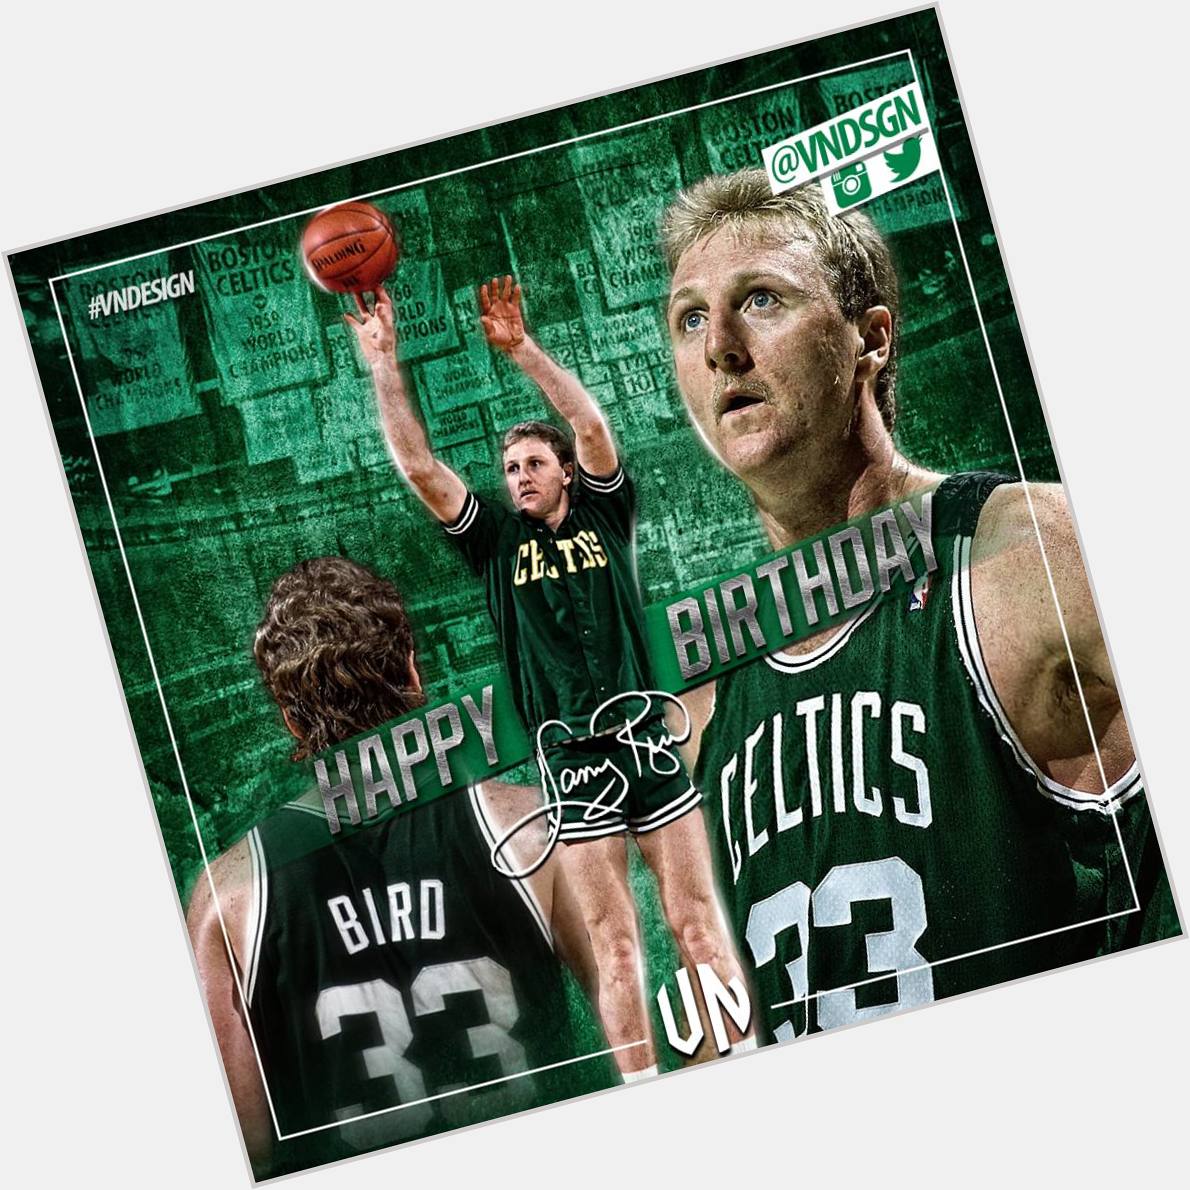 Join me in wishing a happy birthday to legend Larry Bird ! 